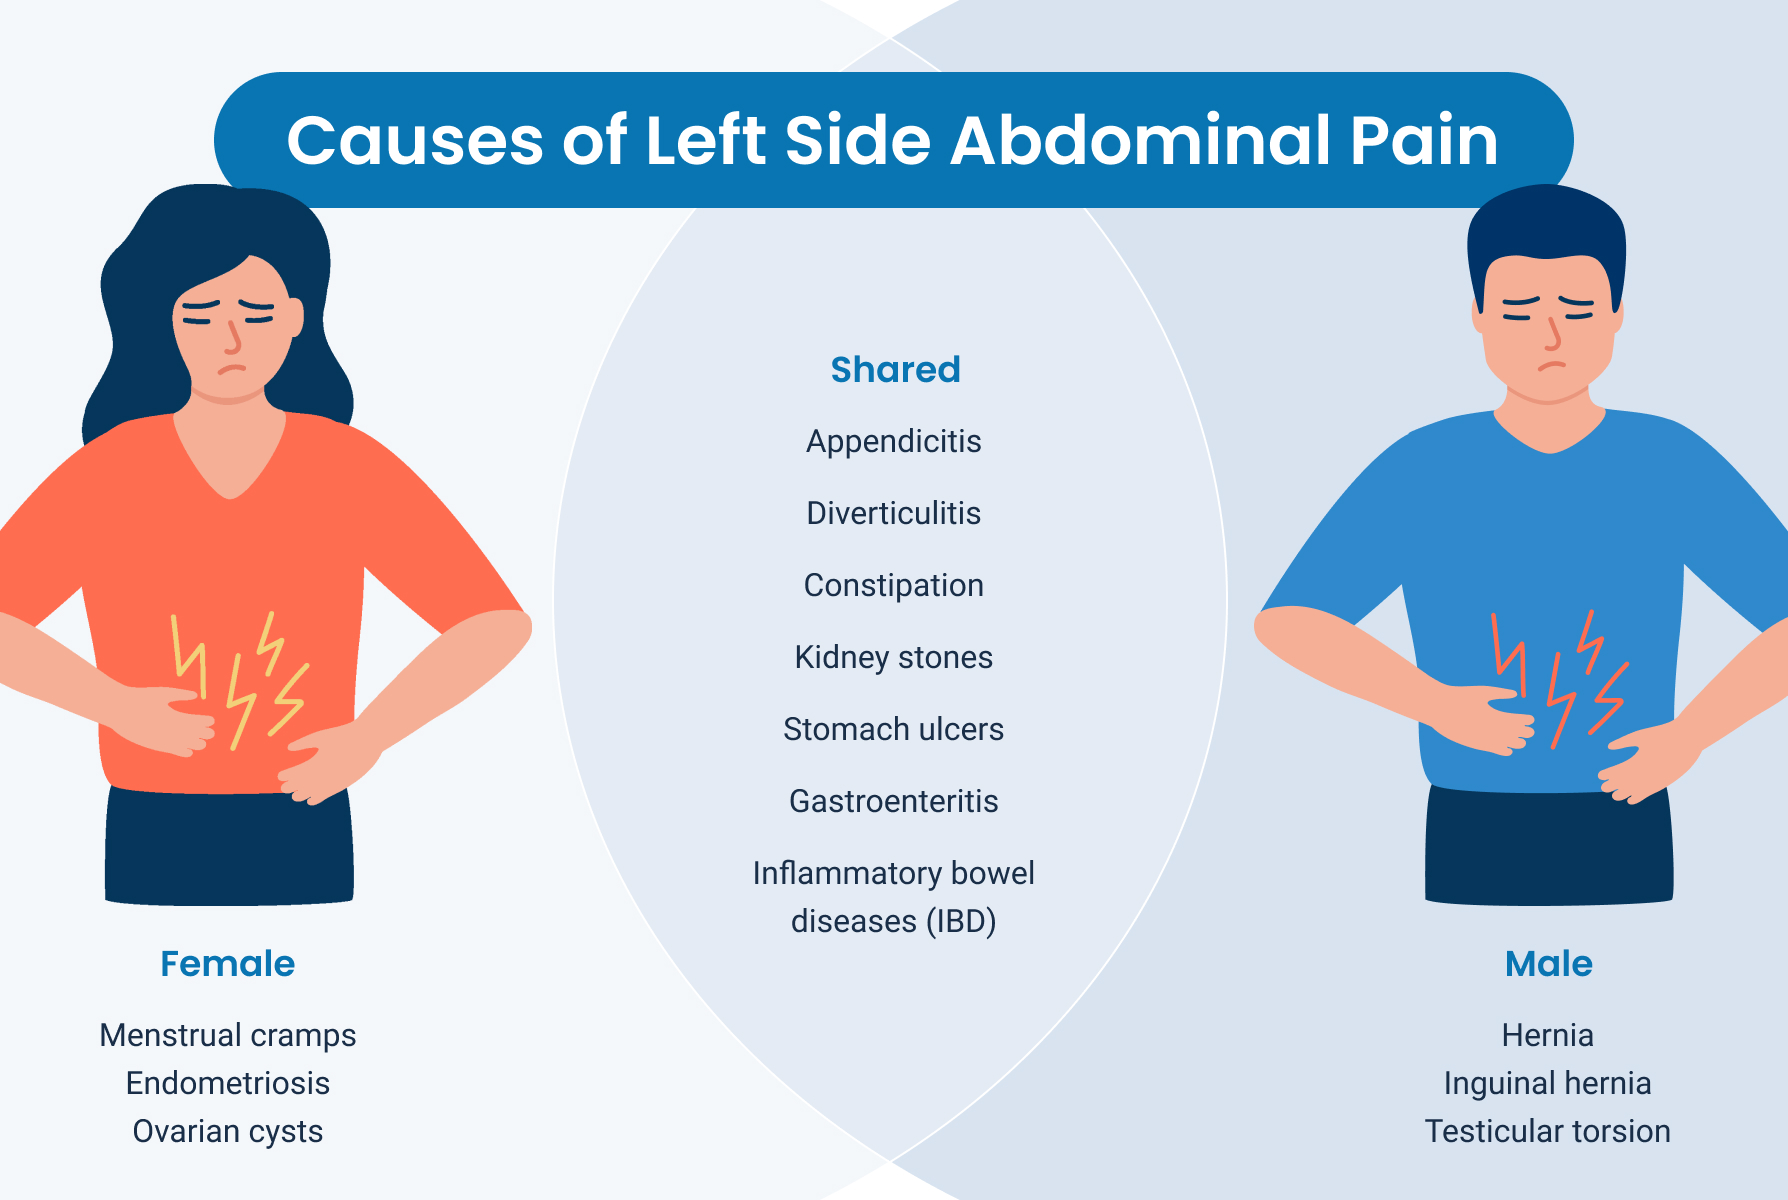 Frequent pain in left flank